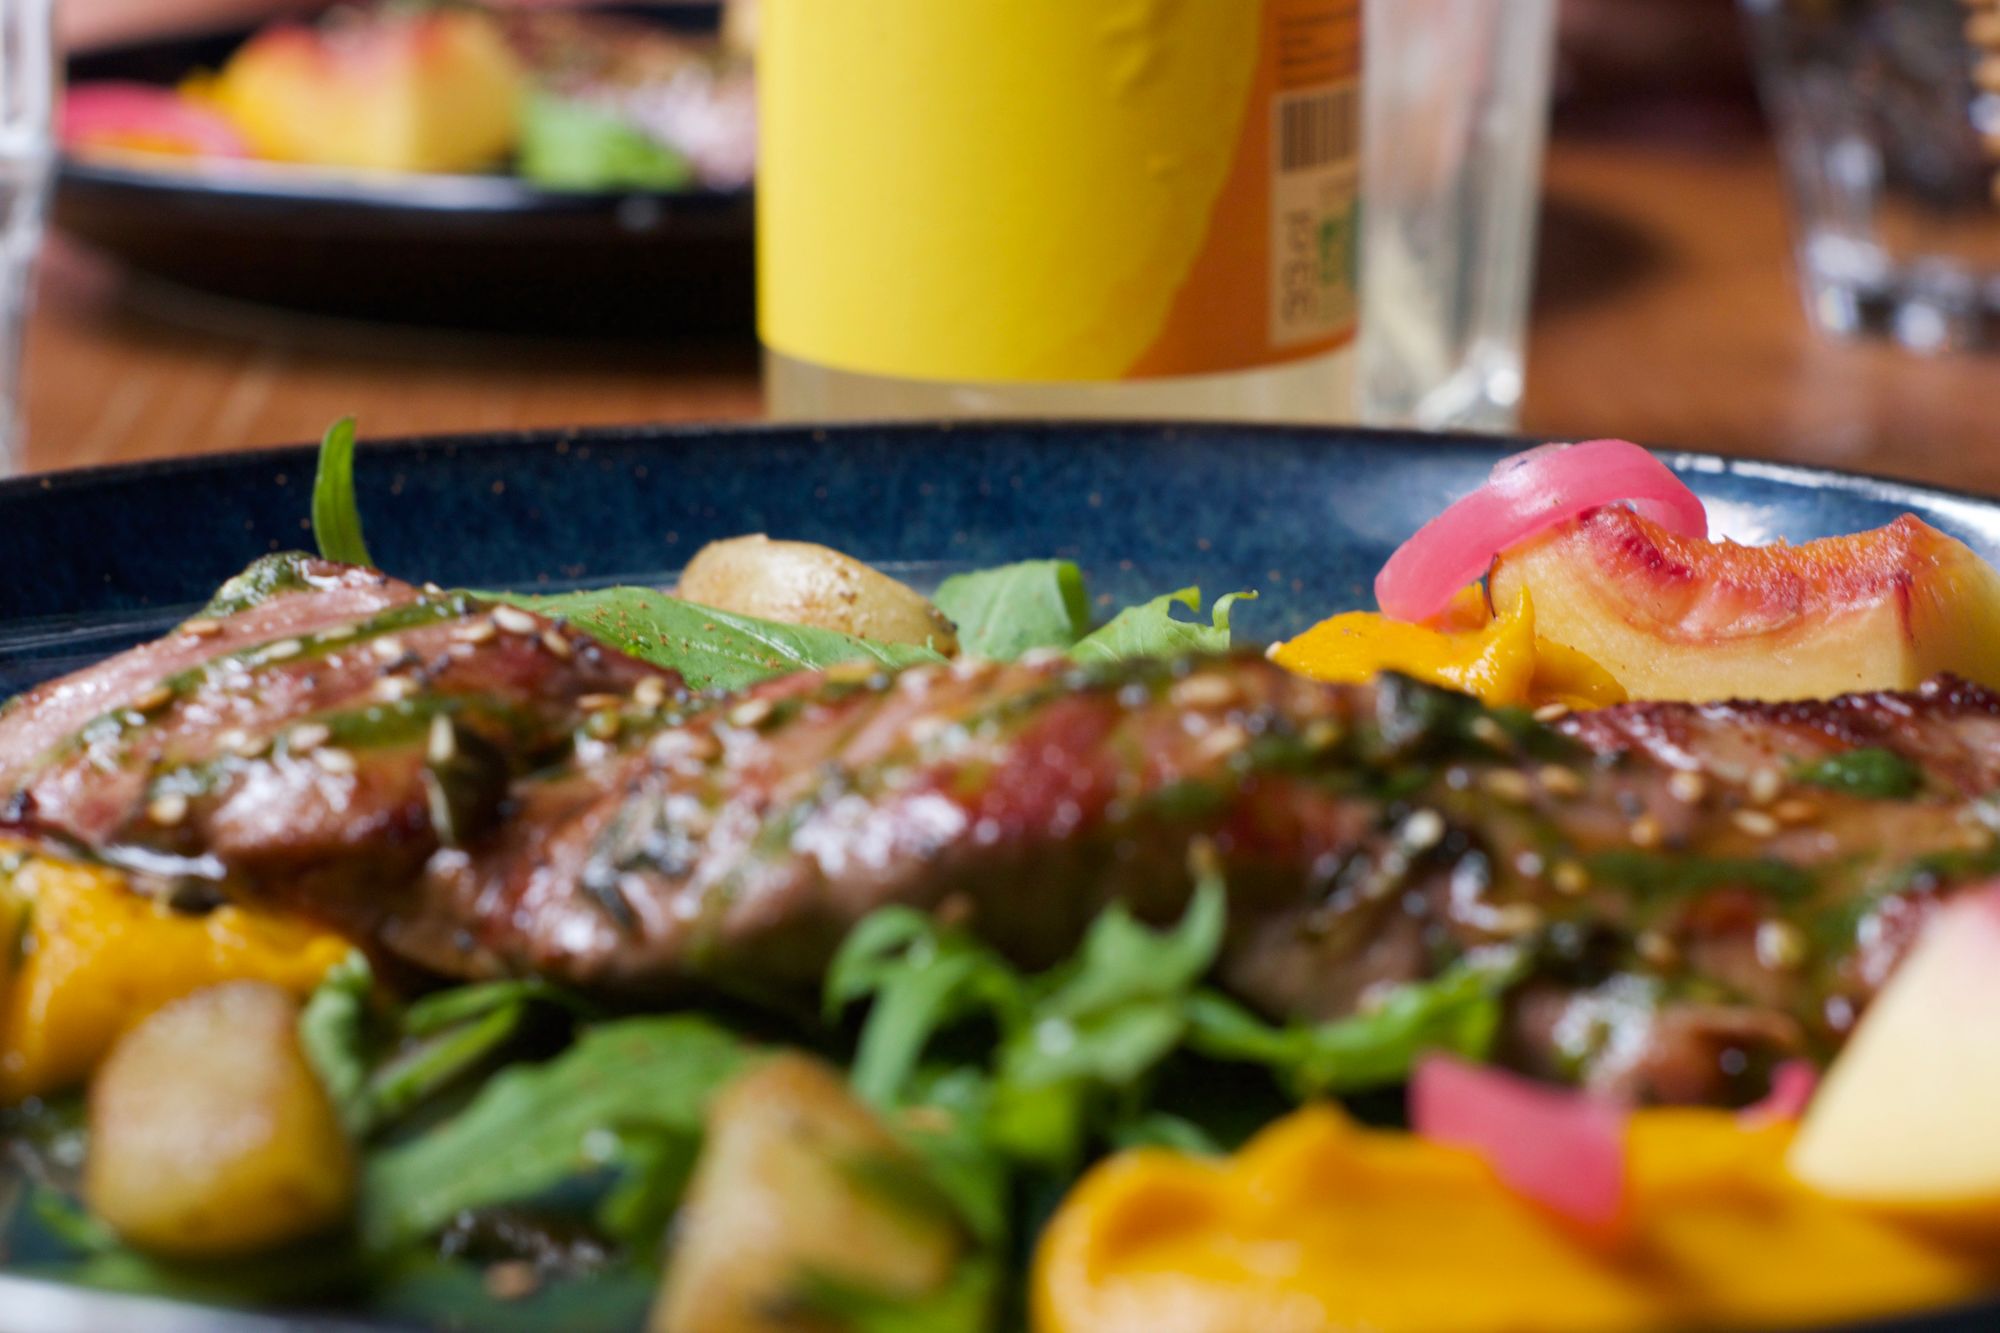 A colourful salad of chargrilled veal with potatoes, nectarines, and greens, in close up.